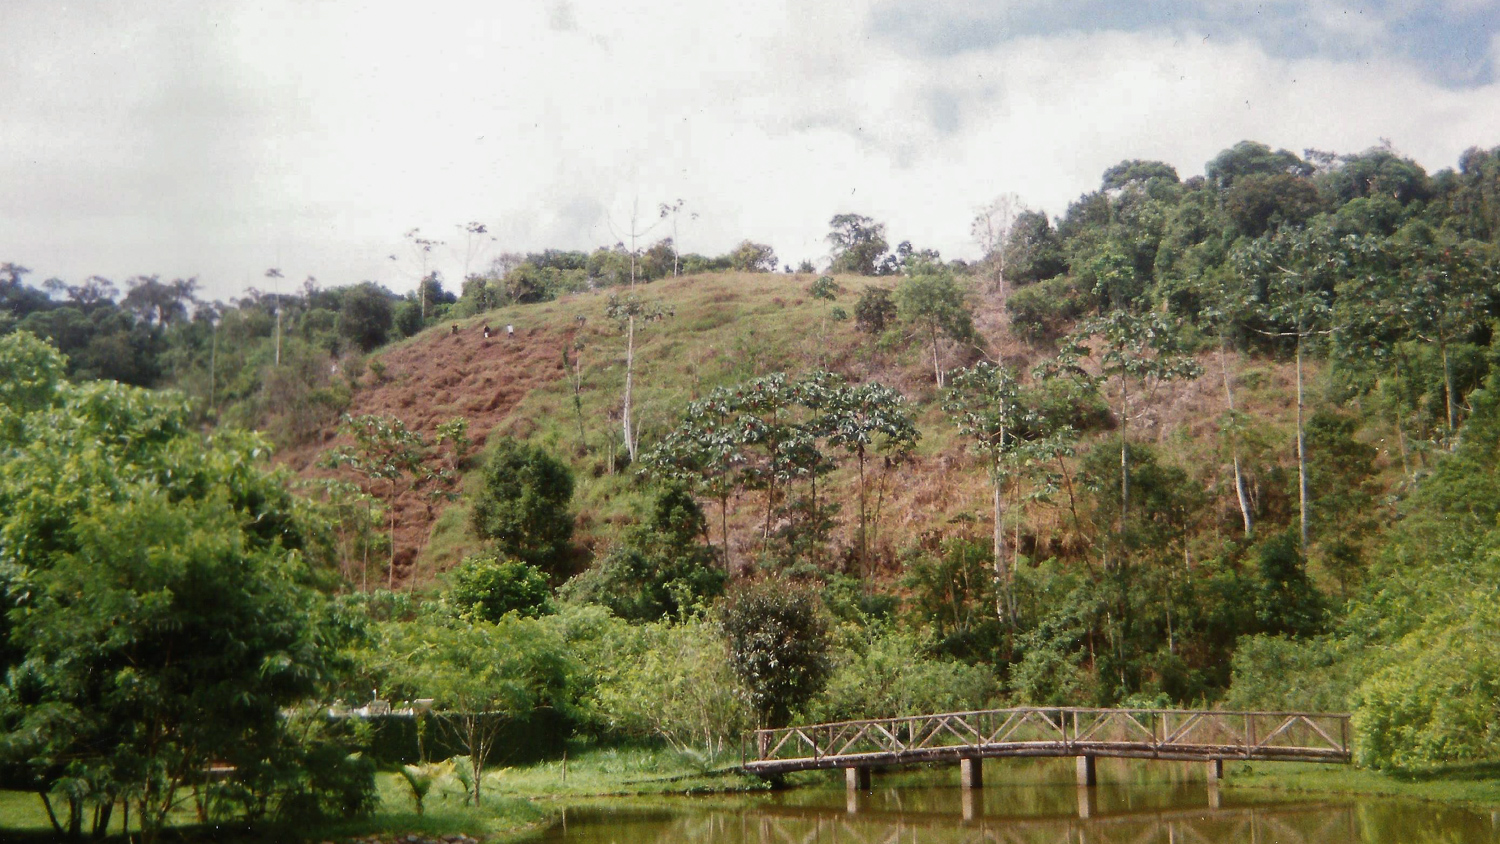 View of the eco-lodge salve floresta